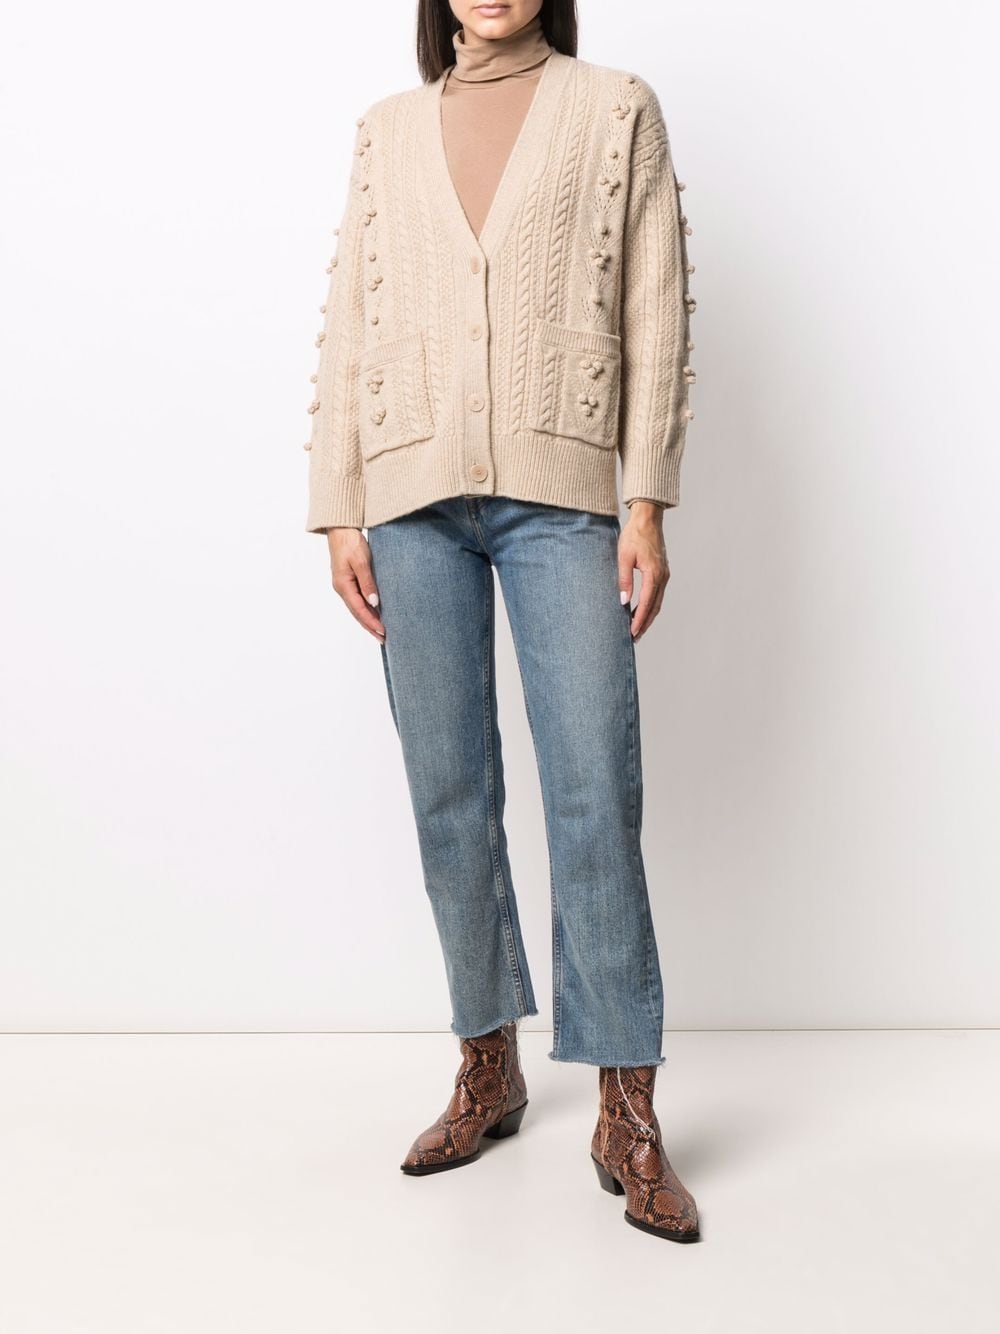 Shop SANDRO Ingrid cable-knit cardigan with Express Delivery - FARFETCH